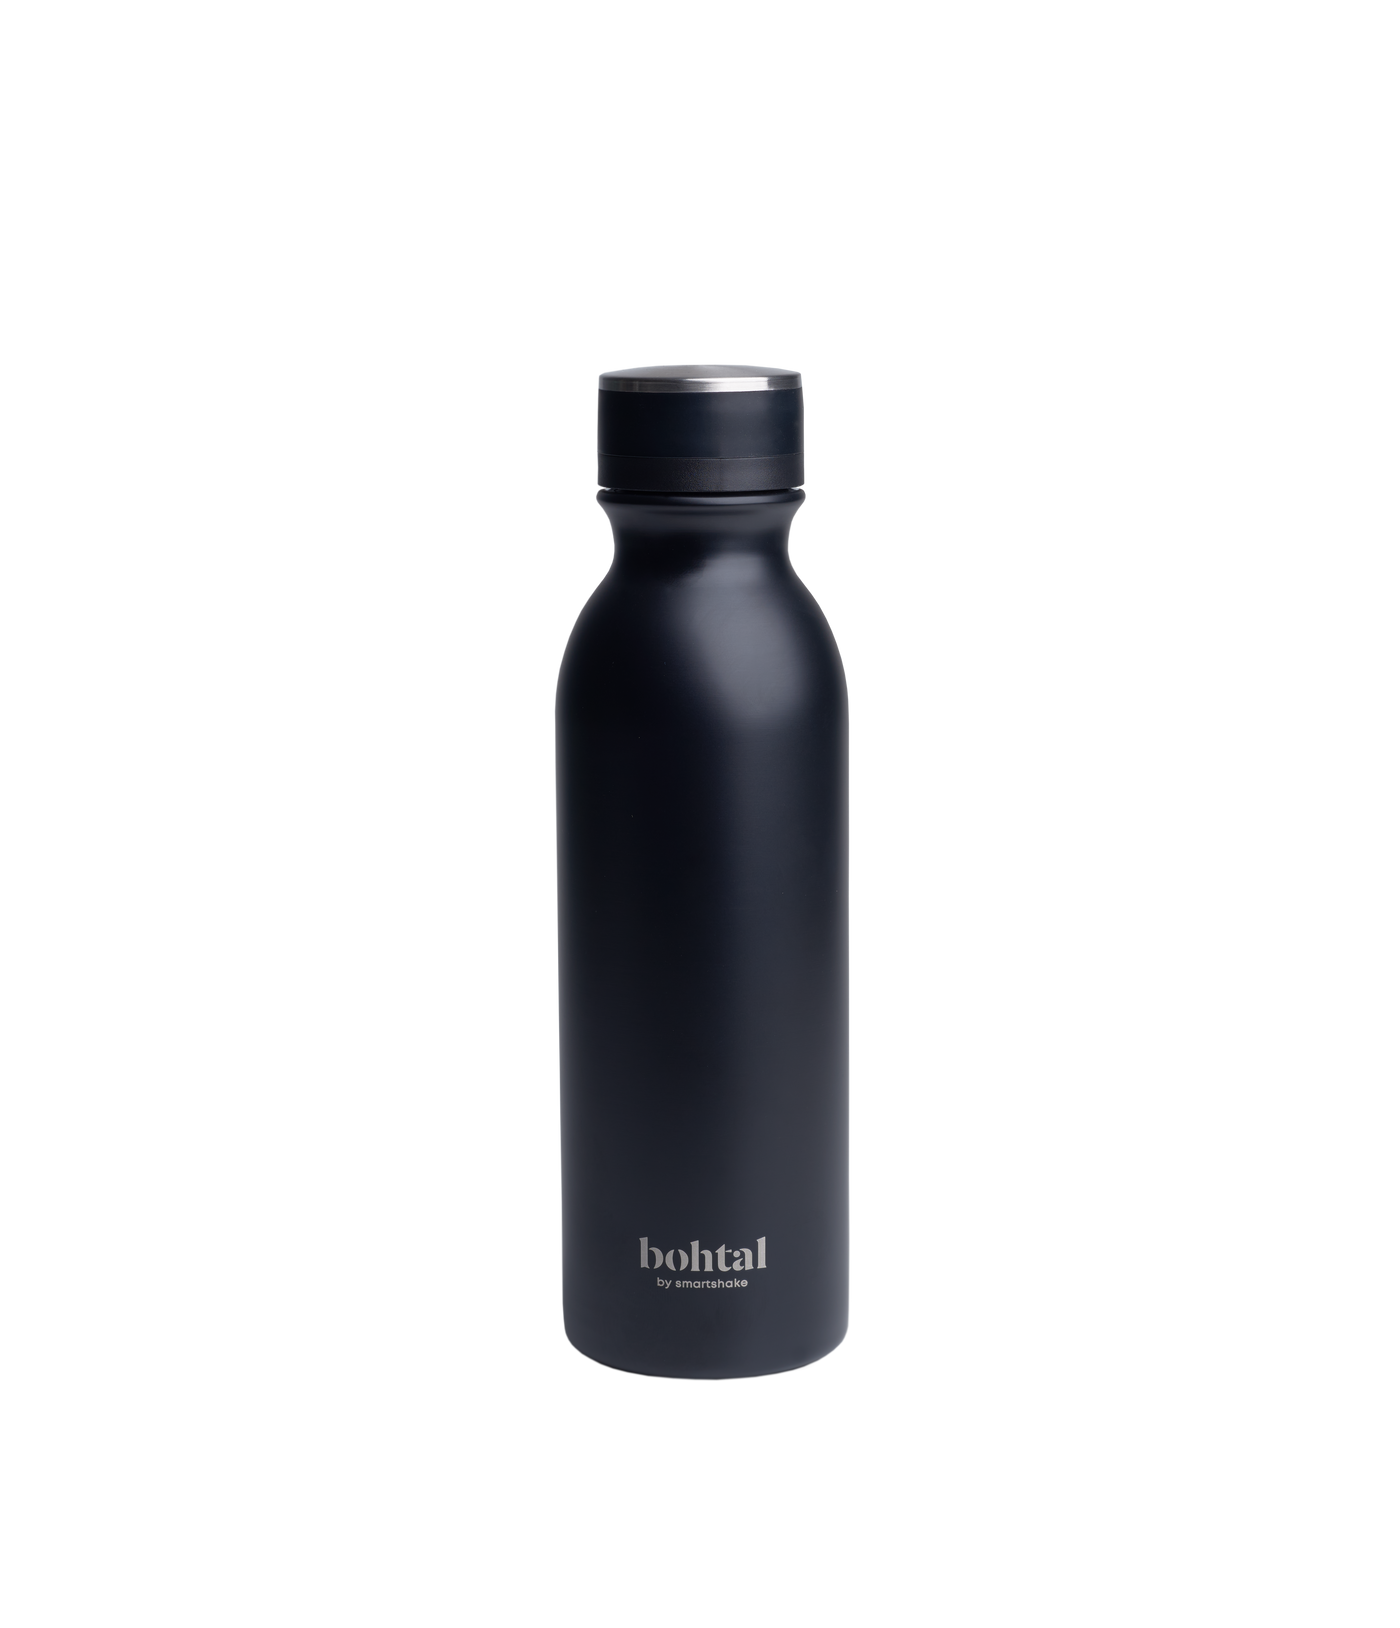 2 pack Bohtal Insulated Flask and Tumbler at 50% off